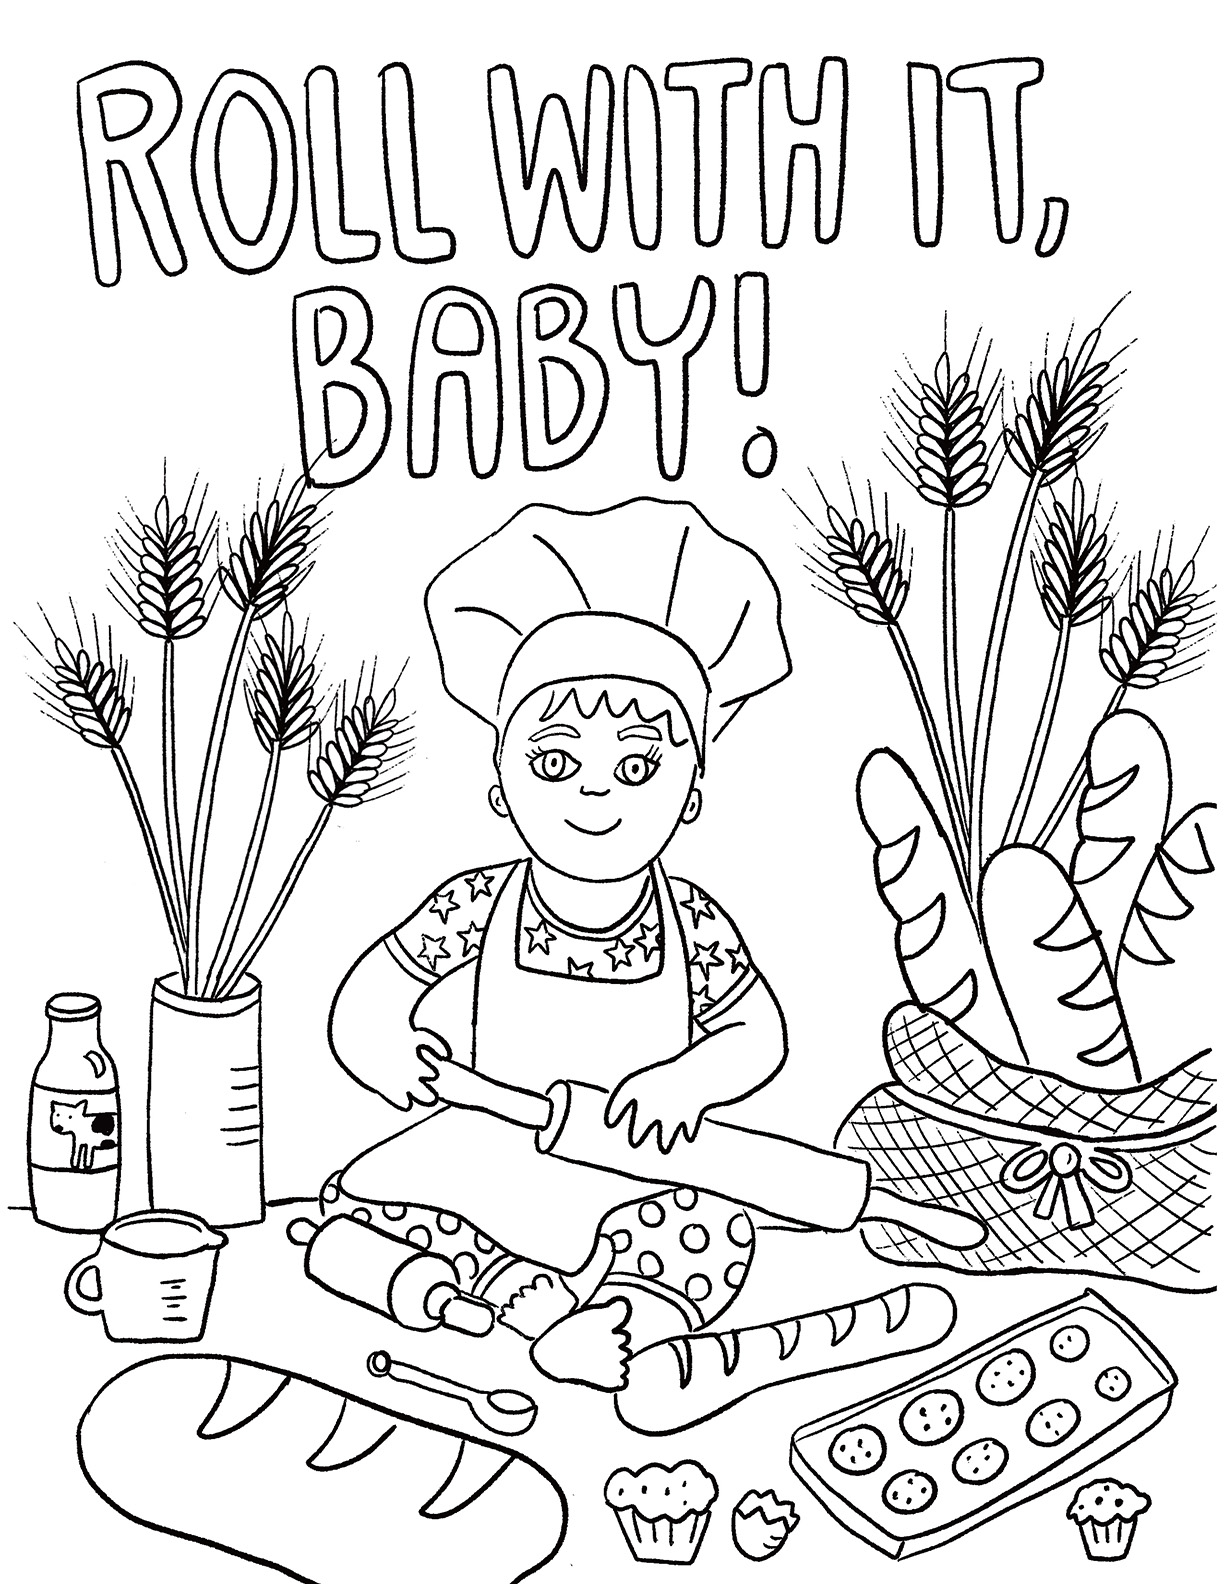 Printable Coloring Pages | August First Bakery - Coloring Home